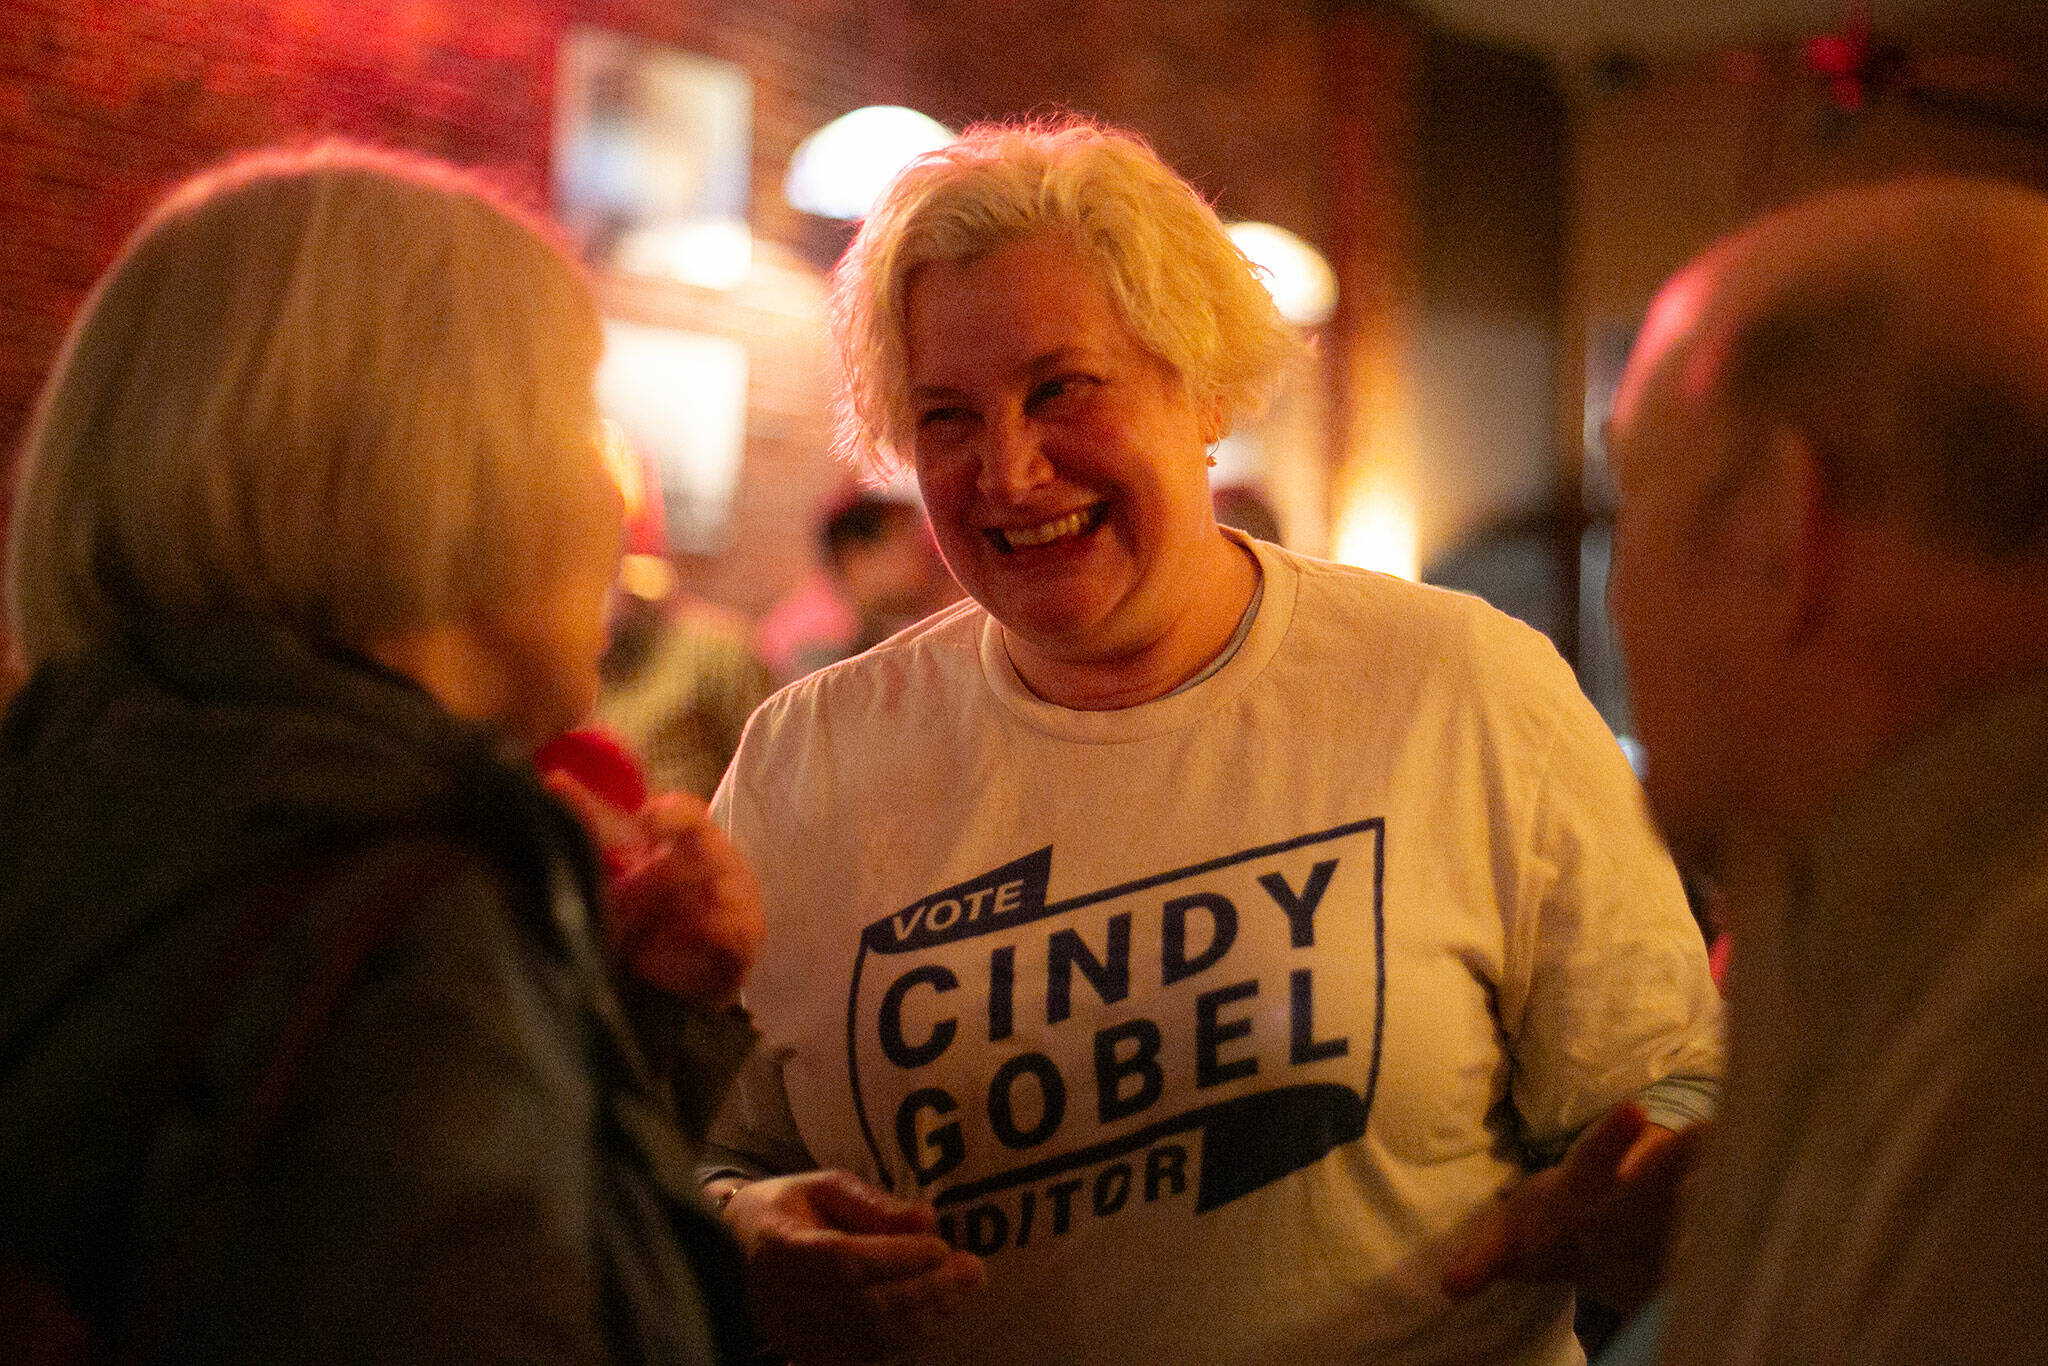 Cindy Gobel, running for Snohomish County Auditor, speaks with supporters during an election night party at Vintage Cafe on Tuesday, Nov. 7, 2023, in Everett, Washington. (Ryan Berry / The Herald)